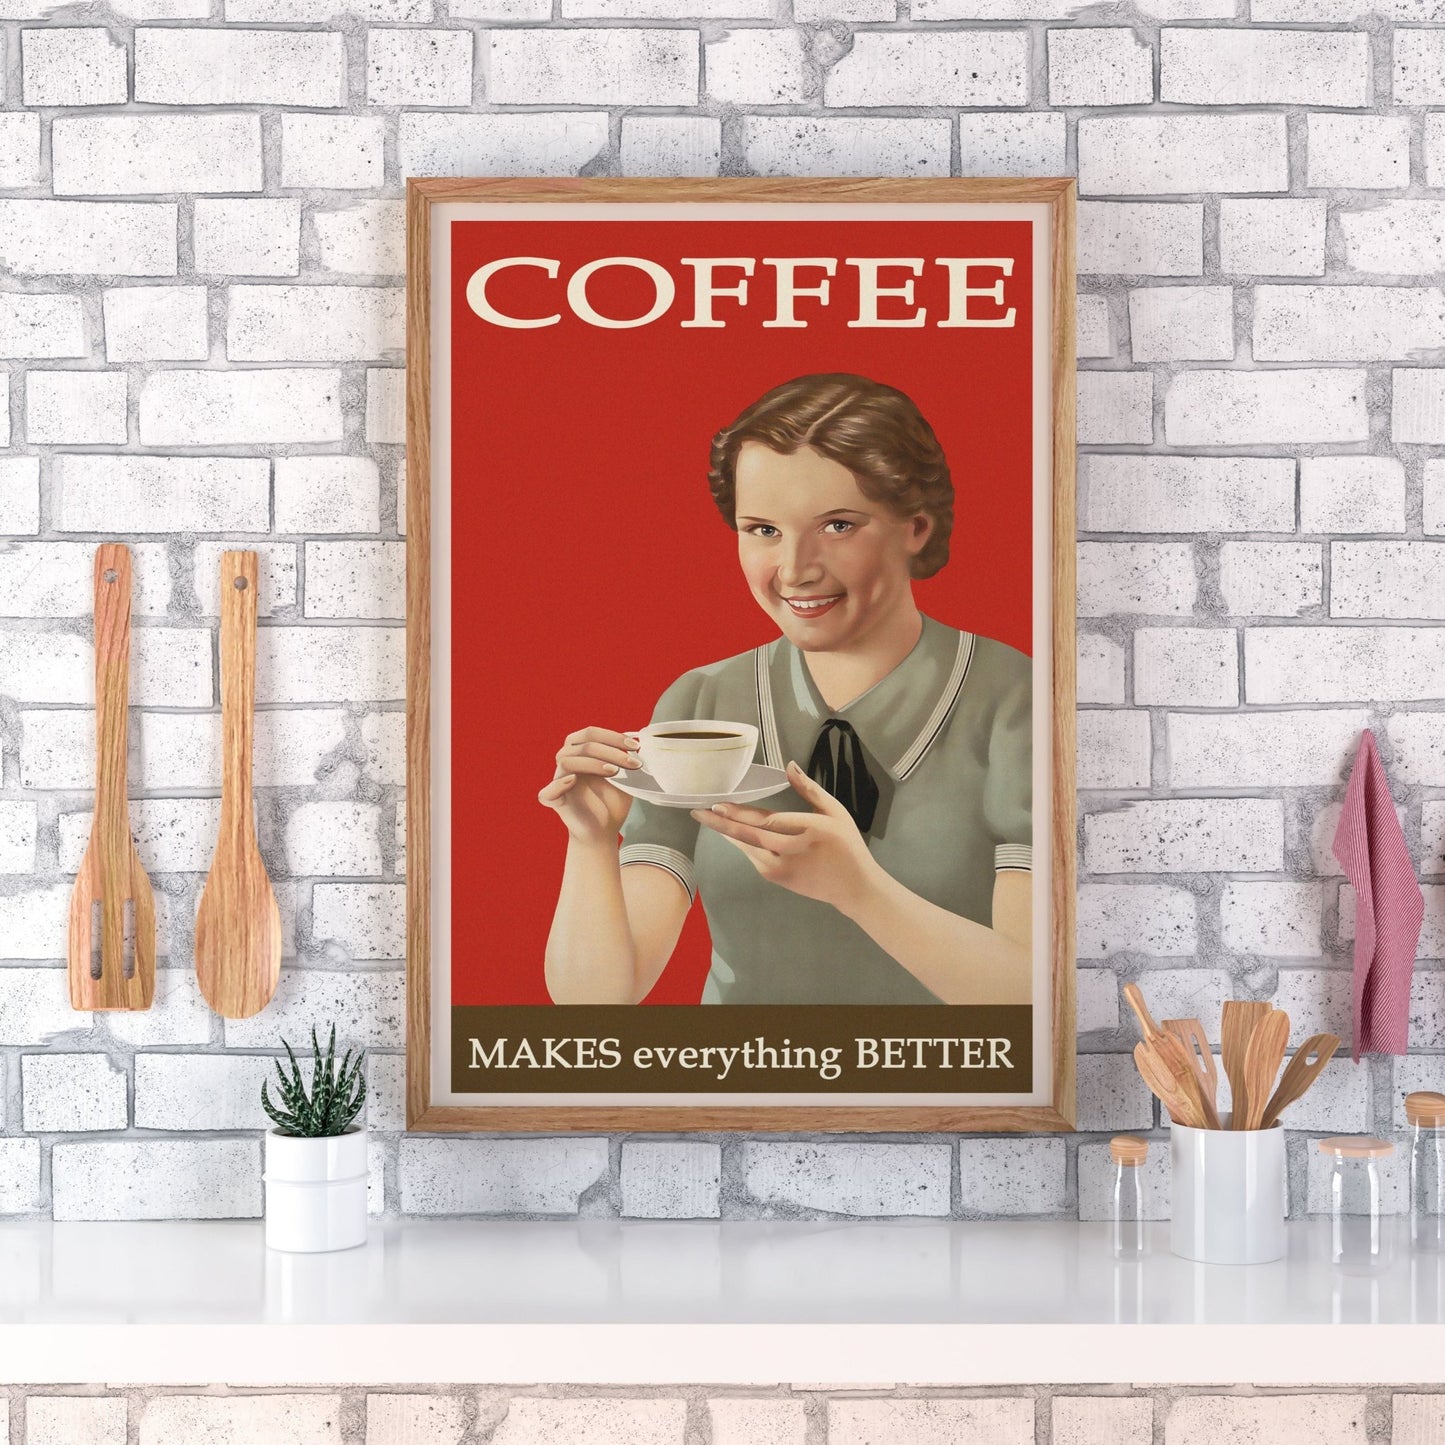 Coffee Makes Everything Better - Vintage Slogan Poster